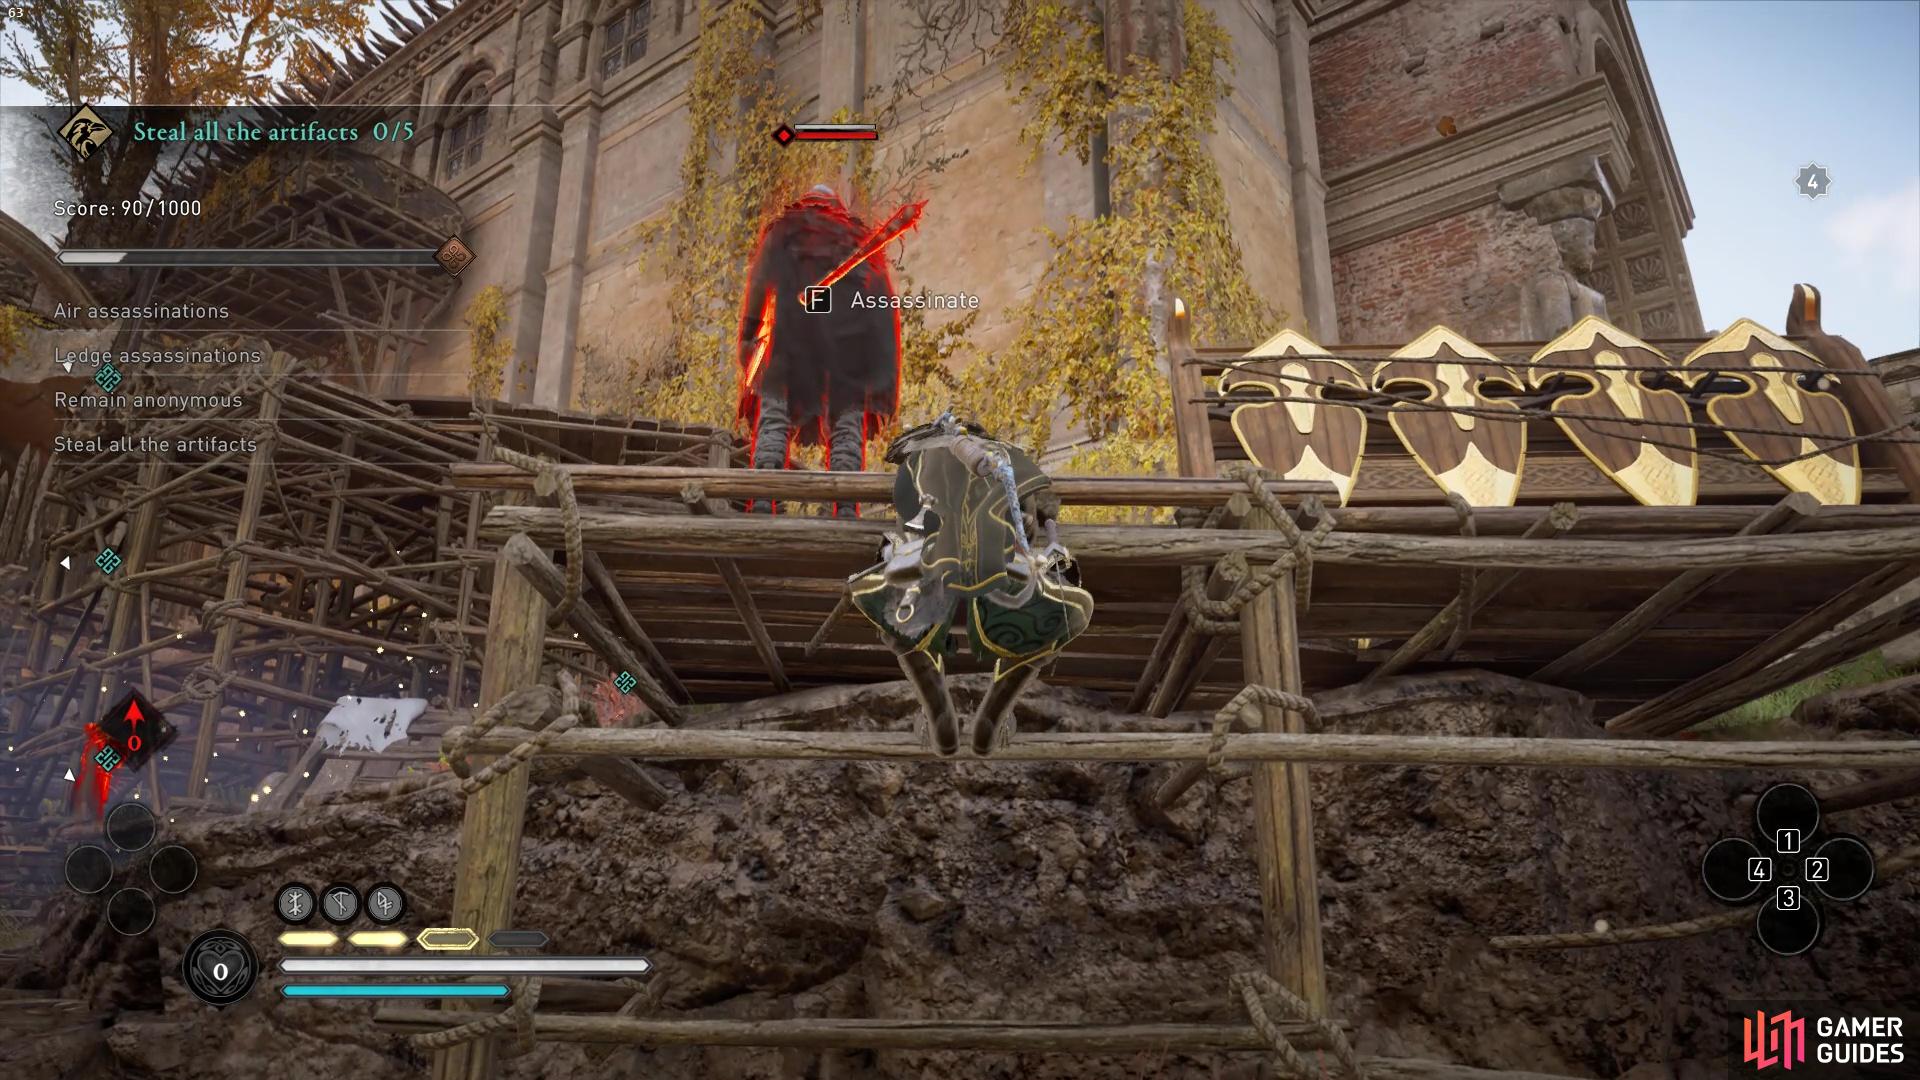 You will also be able to ledge assassinate a few enemies in this section of the trial too.